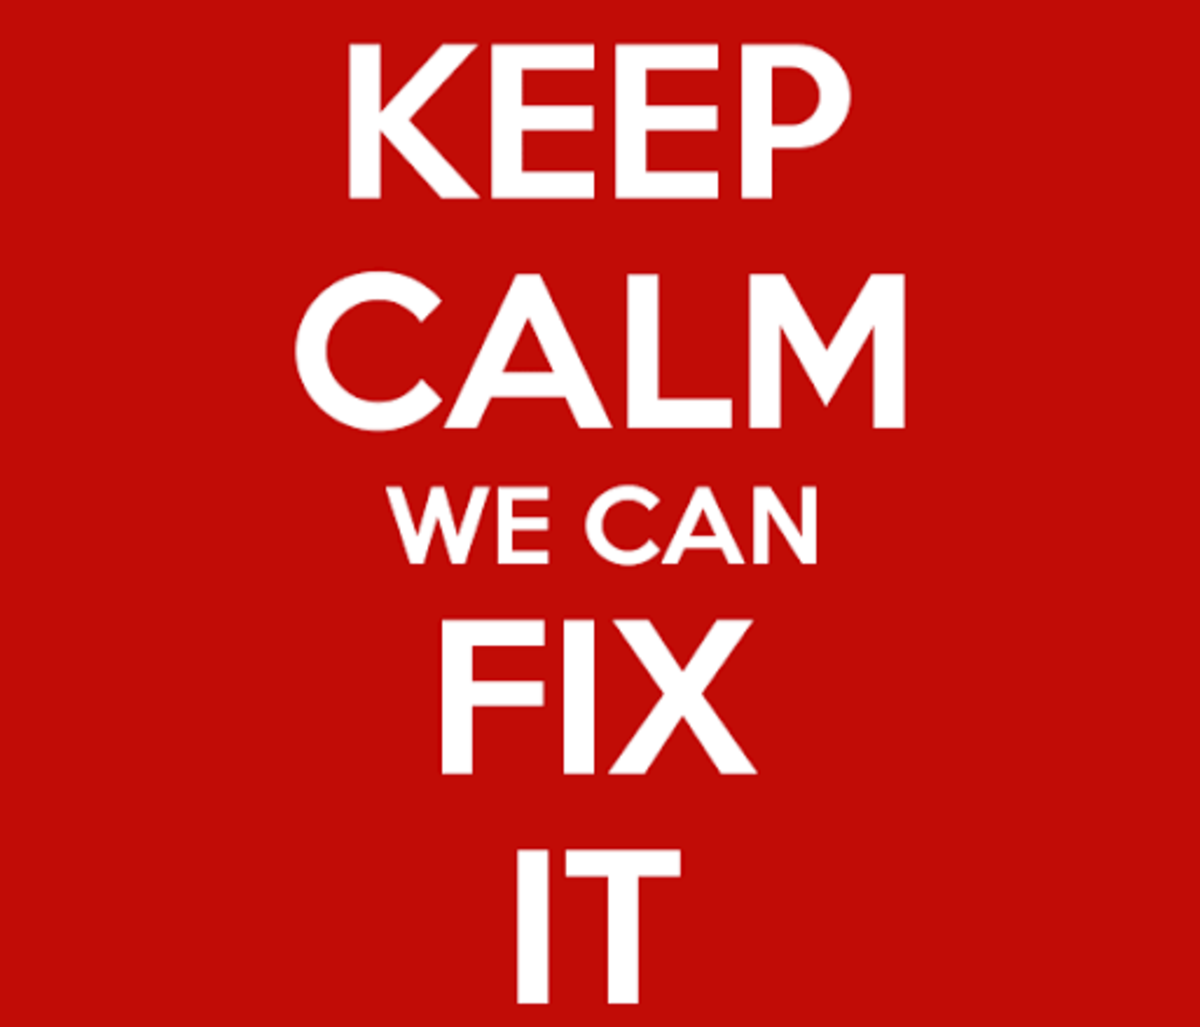 Yes We Can Fix It.